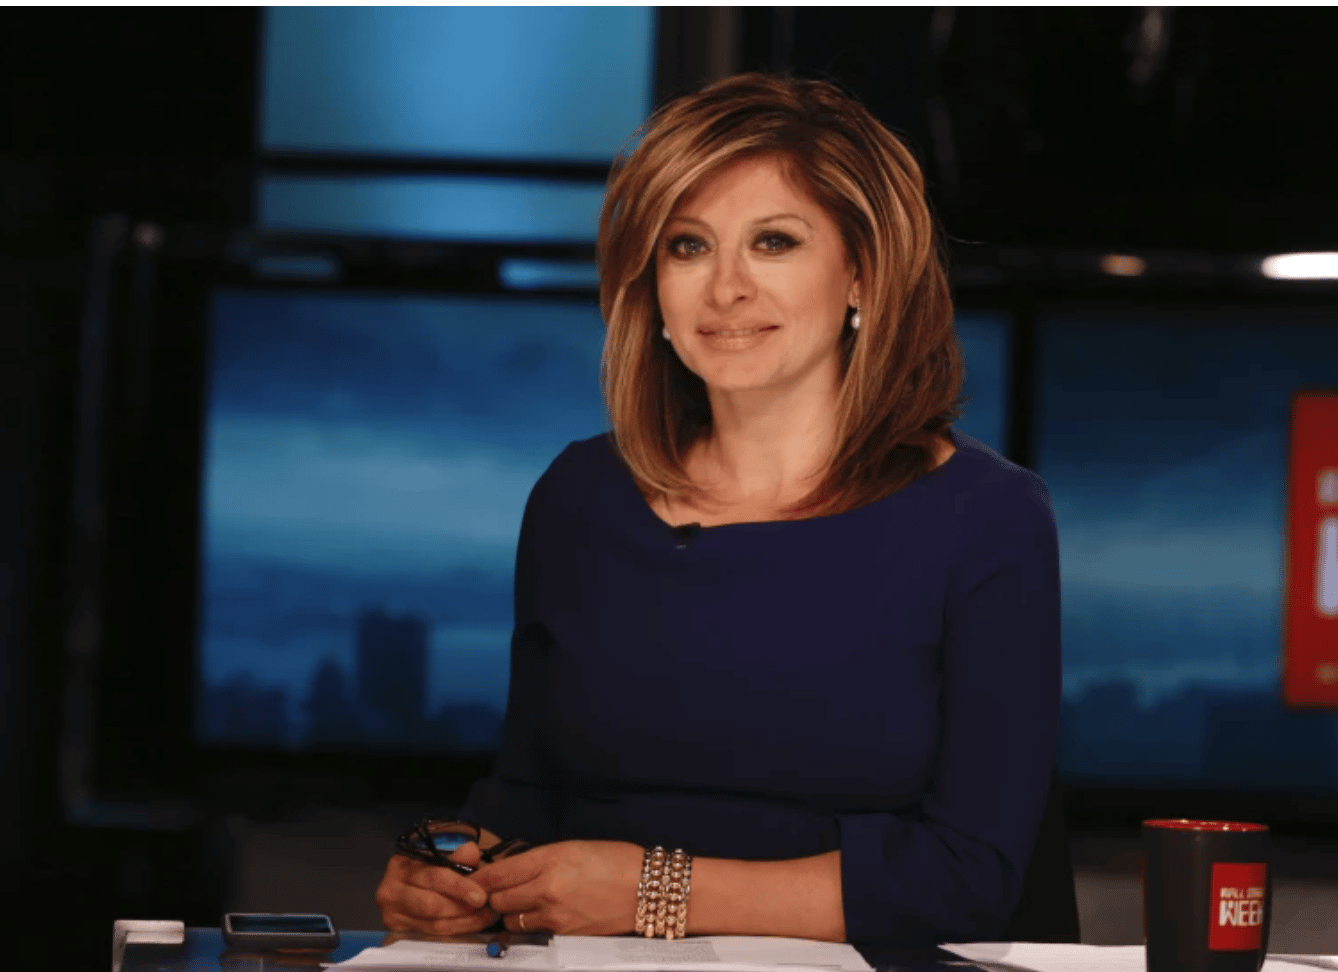 Maria Bartiromo to be Deposed in Defamation Case Against Fox News